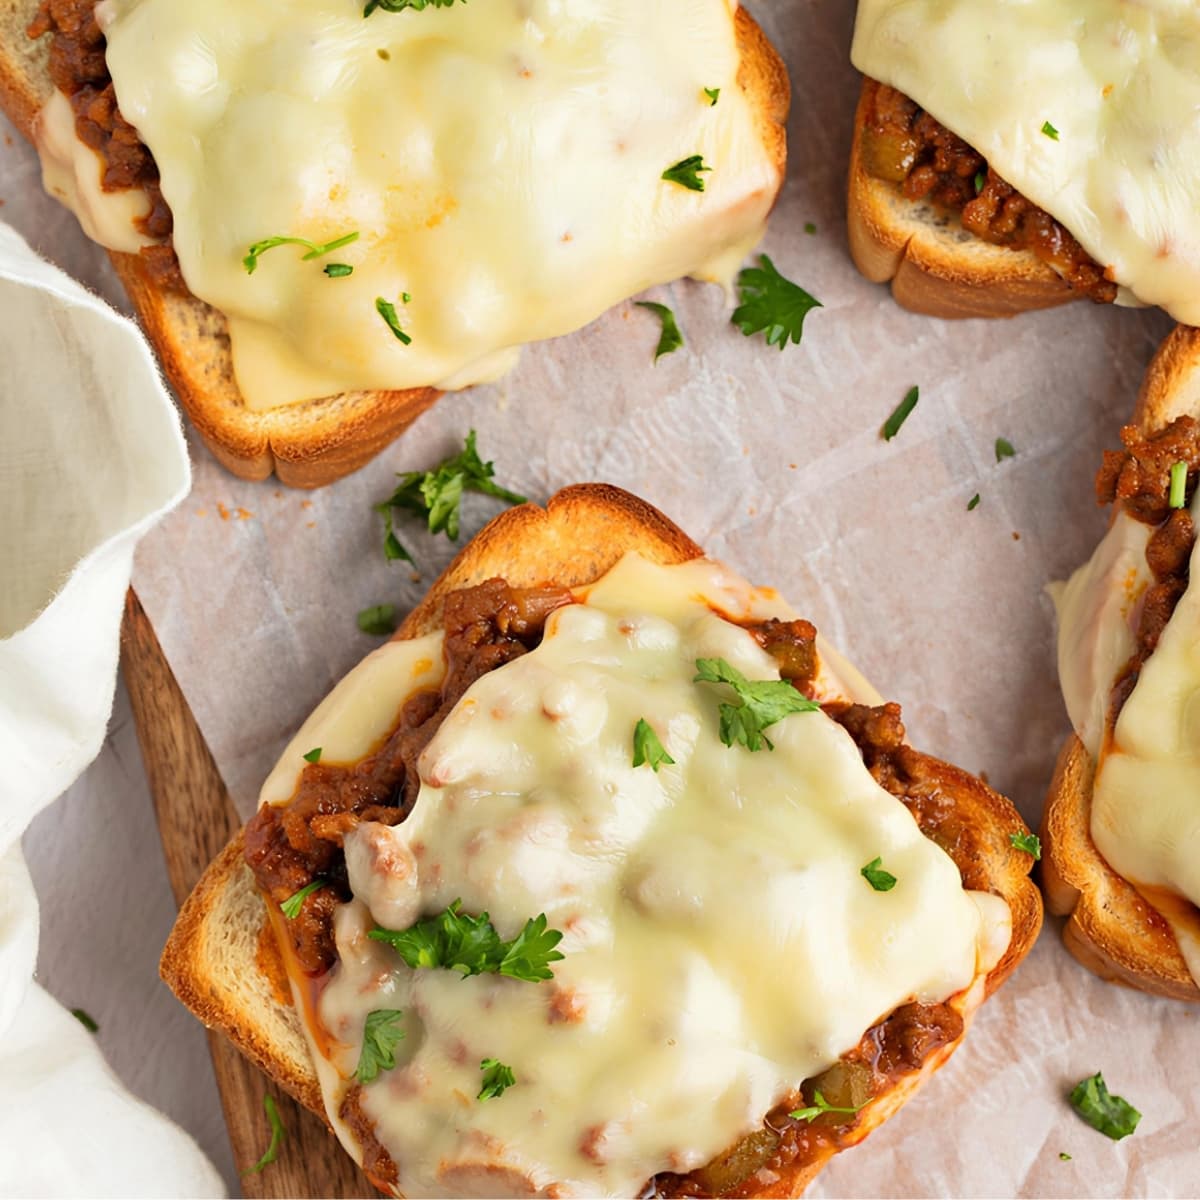 Toasted Sandwich with Ground Beef and Cheesy Sauce